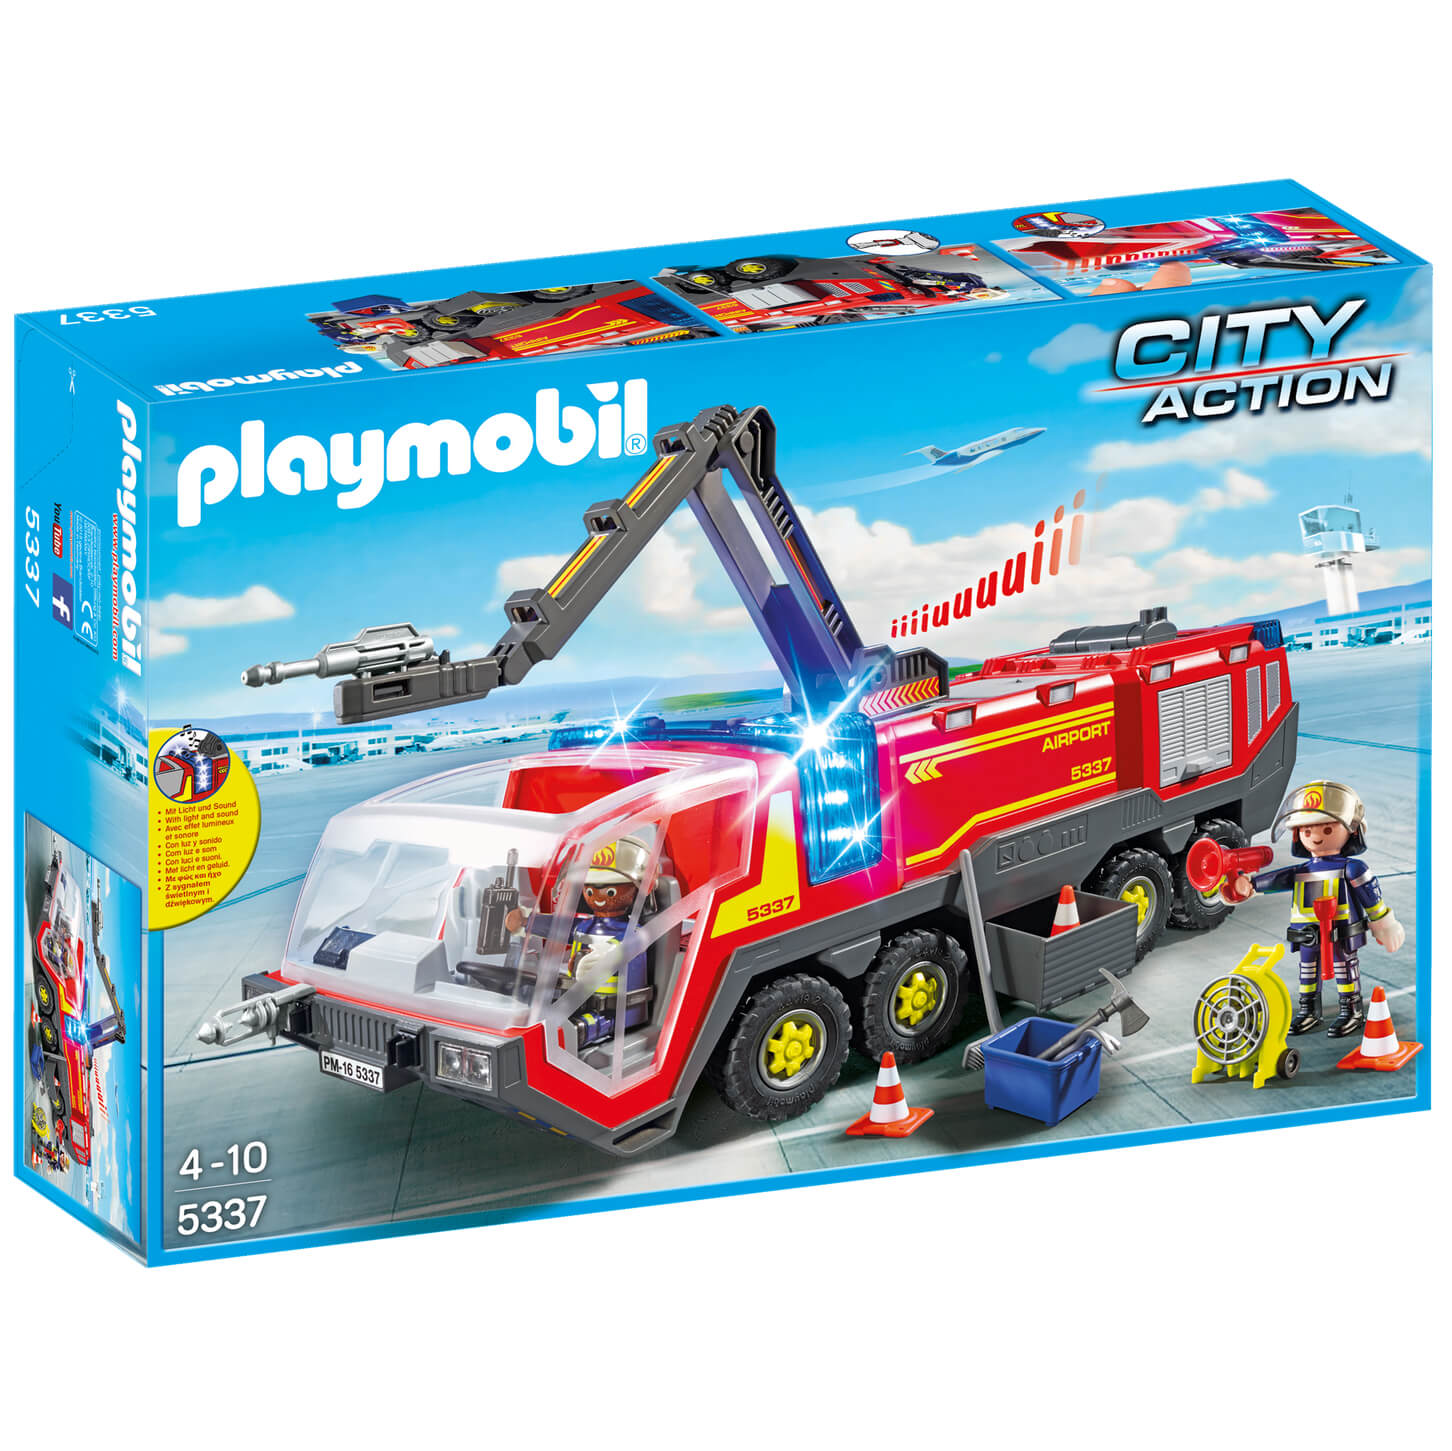 Playmobil City Action Airport Fire Engine with Lights and Sound (5337)